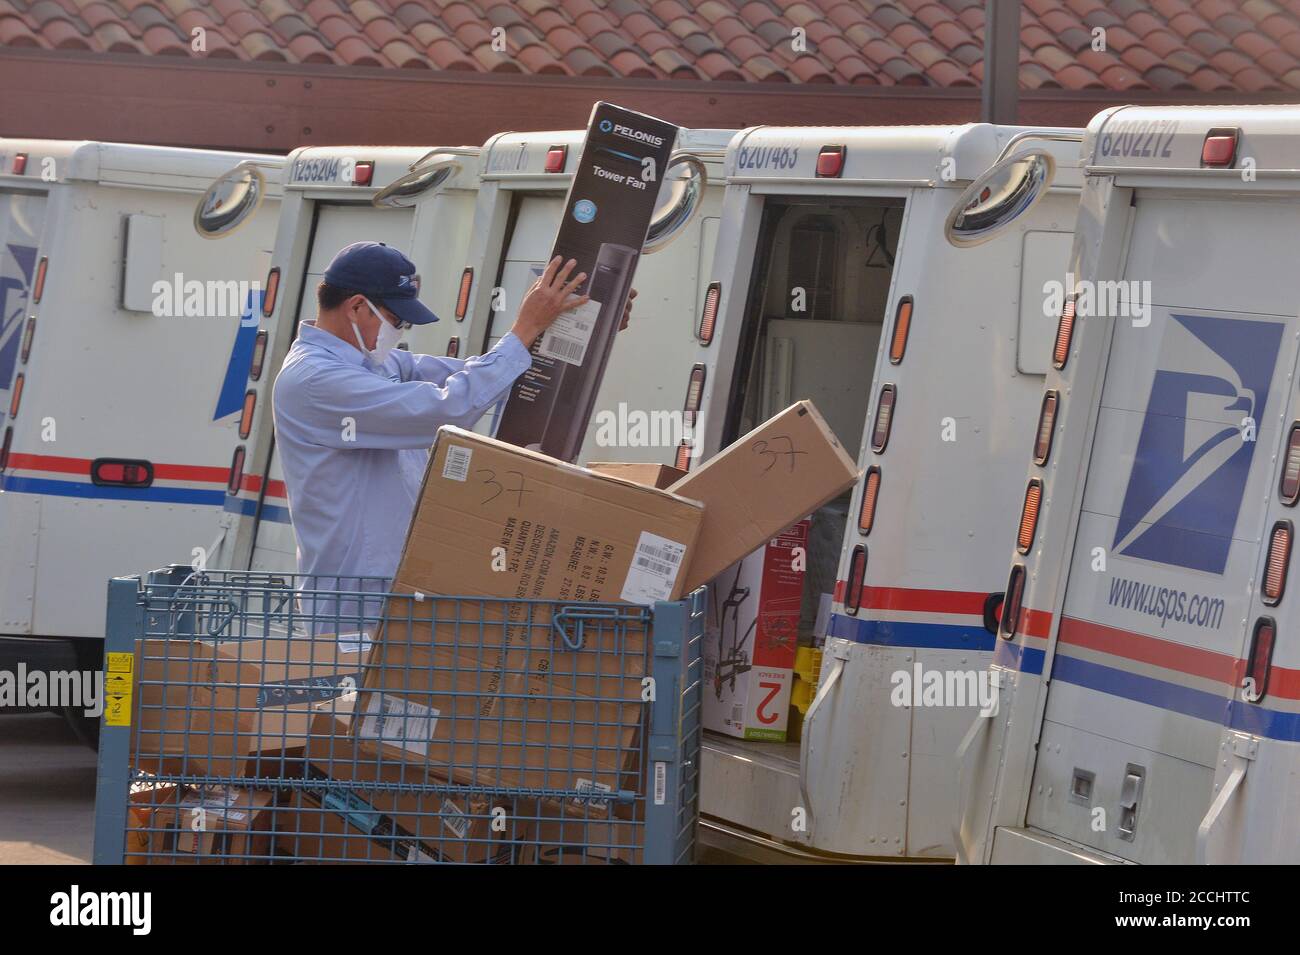 Hollywood, California, USA. 22nd Aug, 2020. Postal workers load up their trucks for Saturday's mail delivery at the Sunset Post Office in the Hollywood section of Los Angeles on Saturday, August 22, 2020. A coalition of activists declared a "day of action" today aimed at saving the U.S. Postal Service, with nearly 700 rallies planned nationwide. Credit: UPI/Alamy Live News Stock Photo